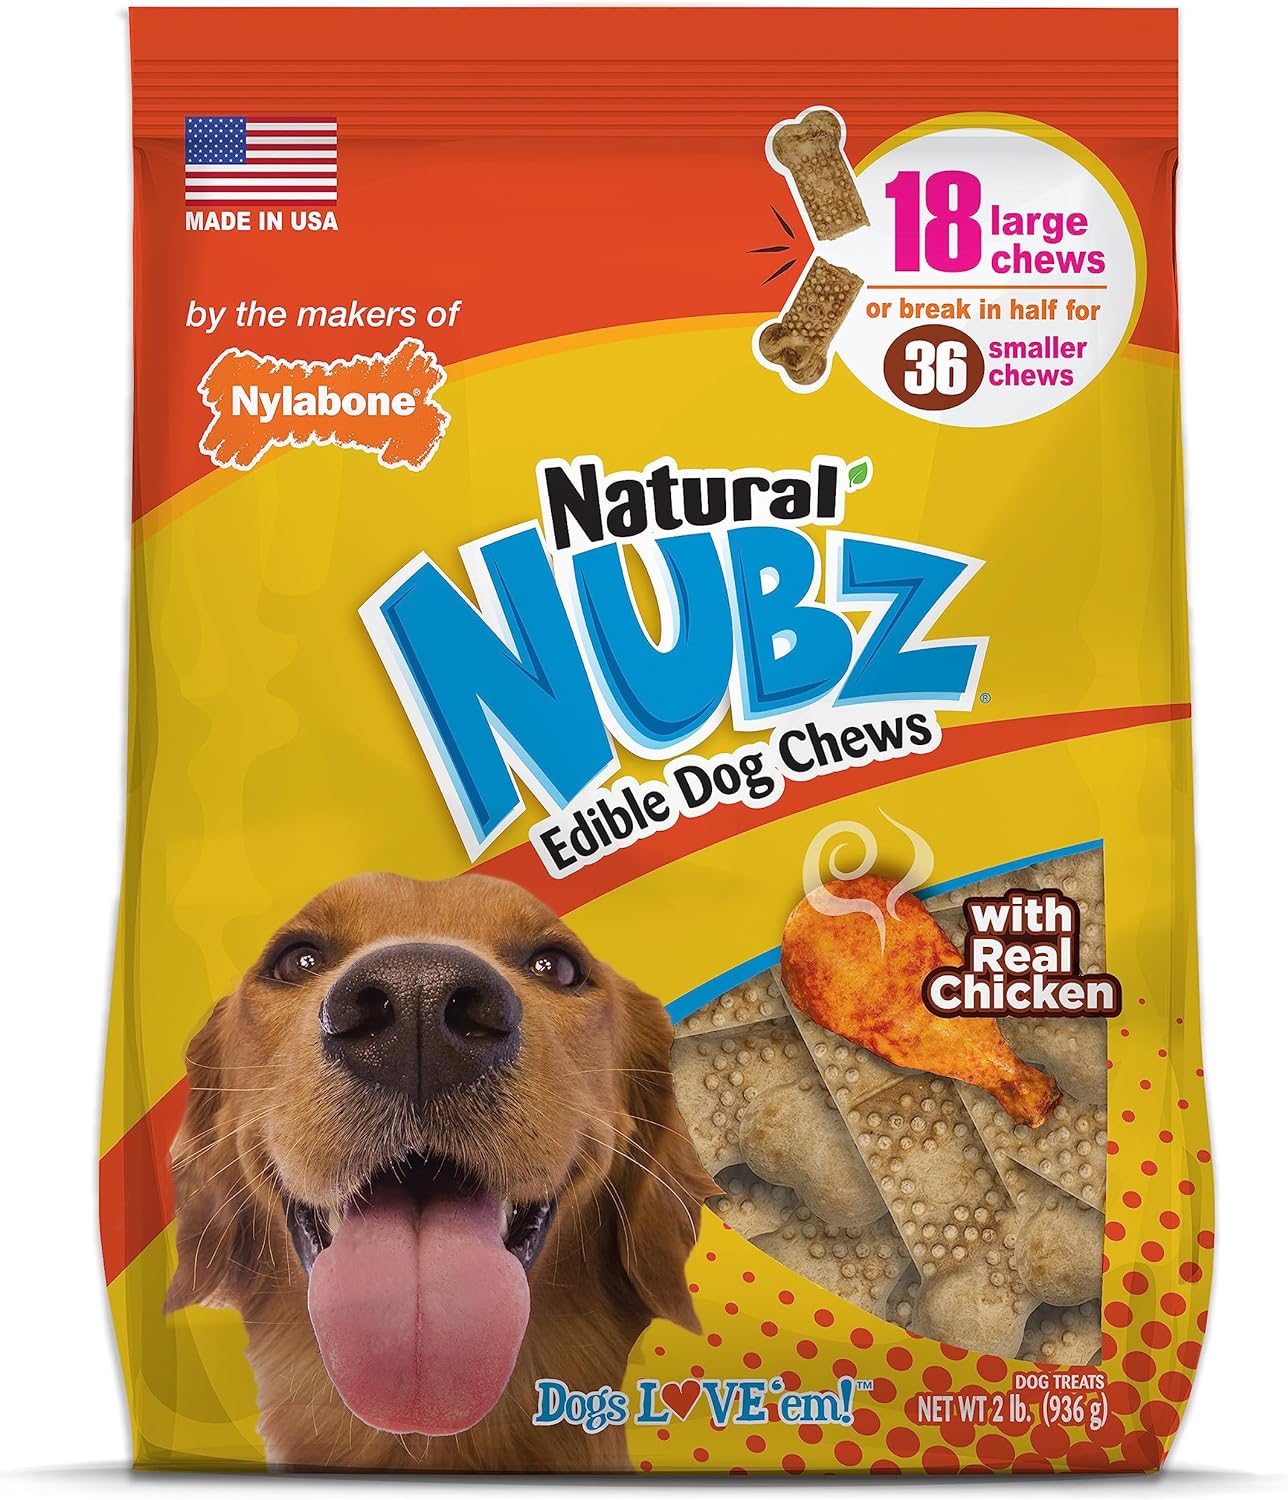 Nylabone Nubz Chicken Dog Treats I All Natural Edible Chew Treats for Dogs l Made in USA l 18 Pack Large - Up to 50 lbs